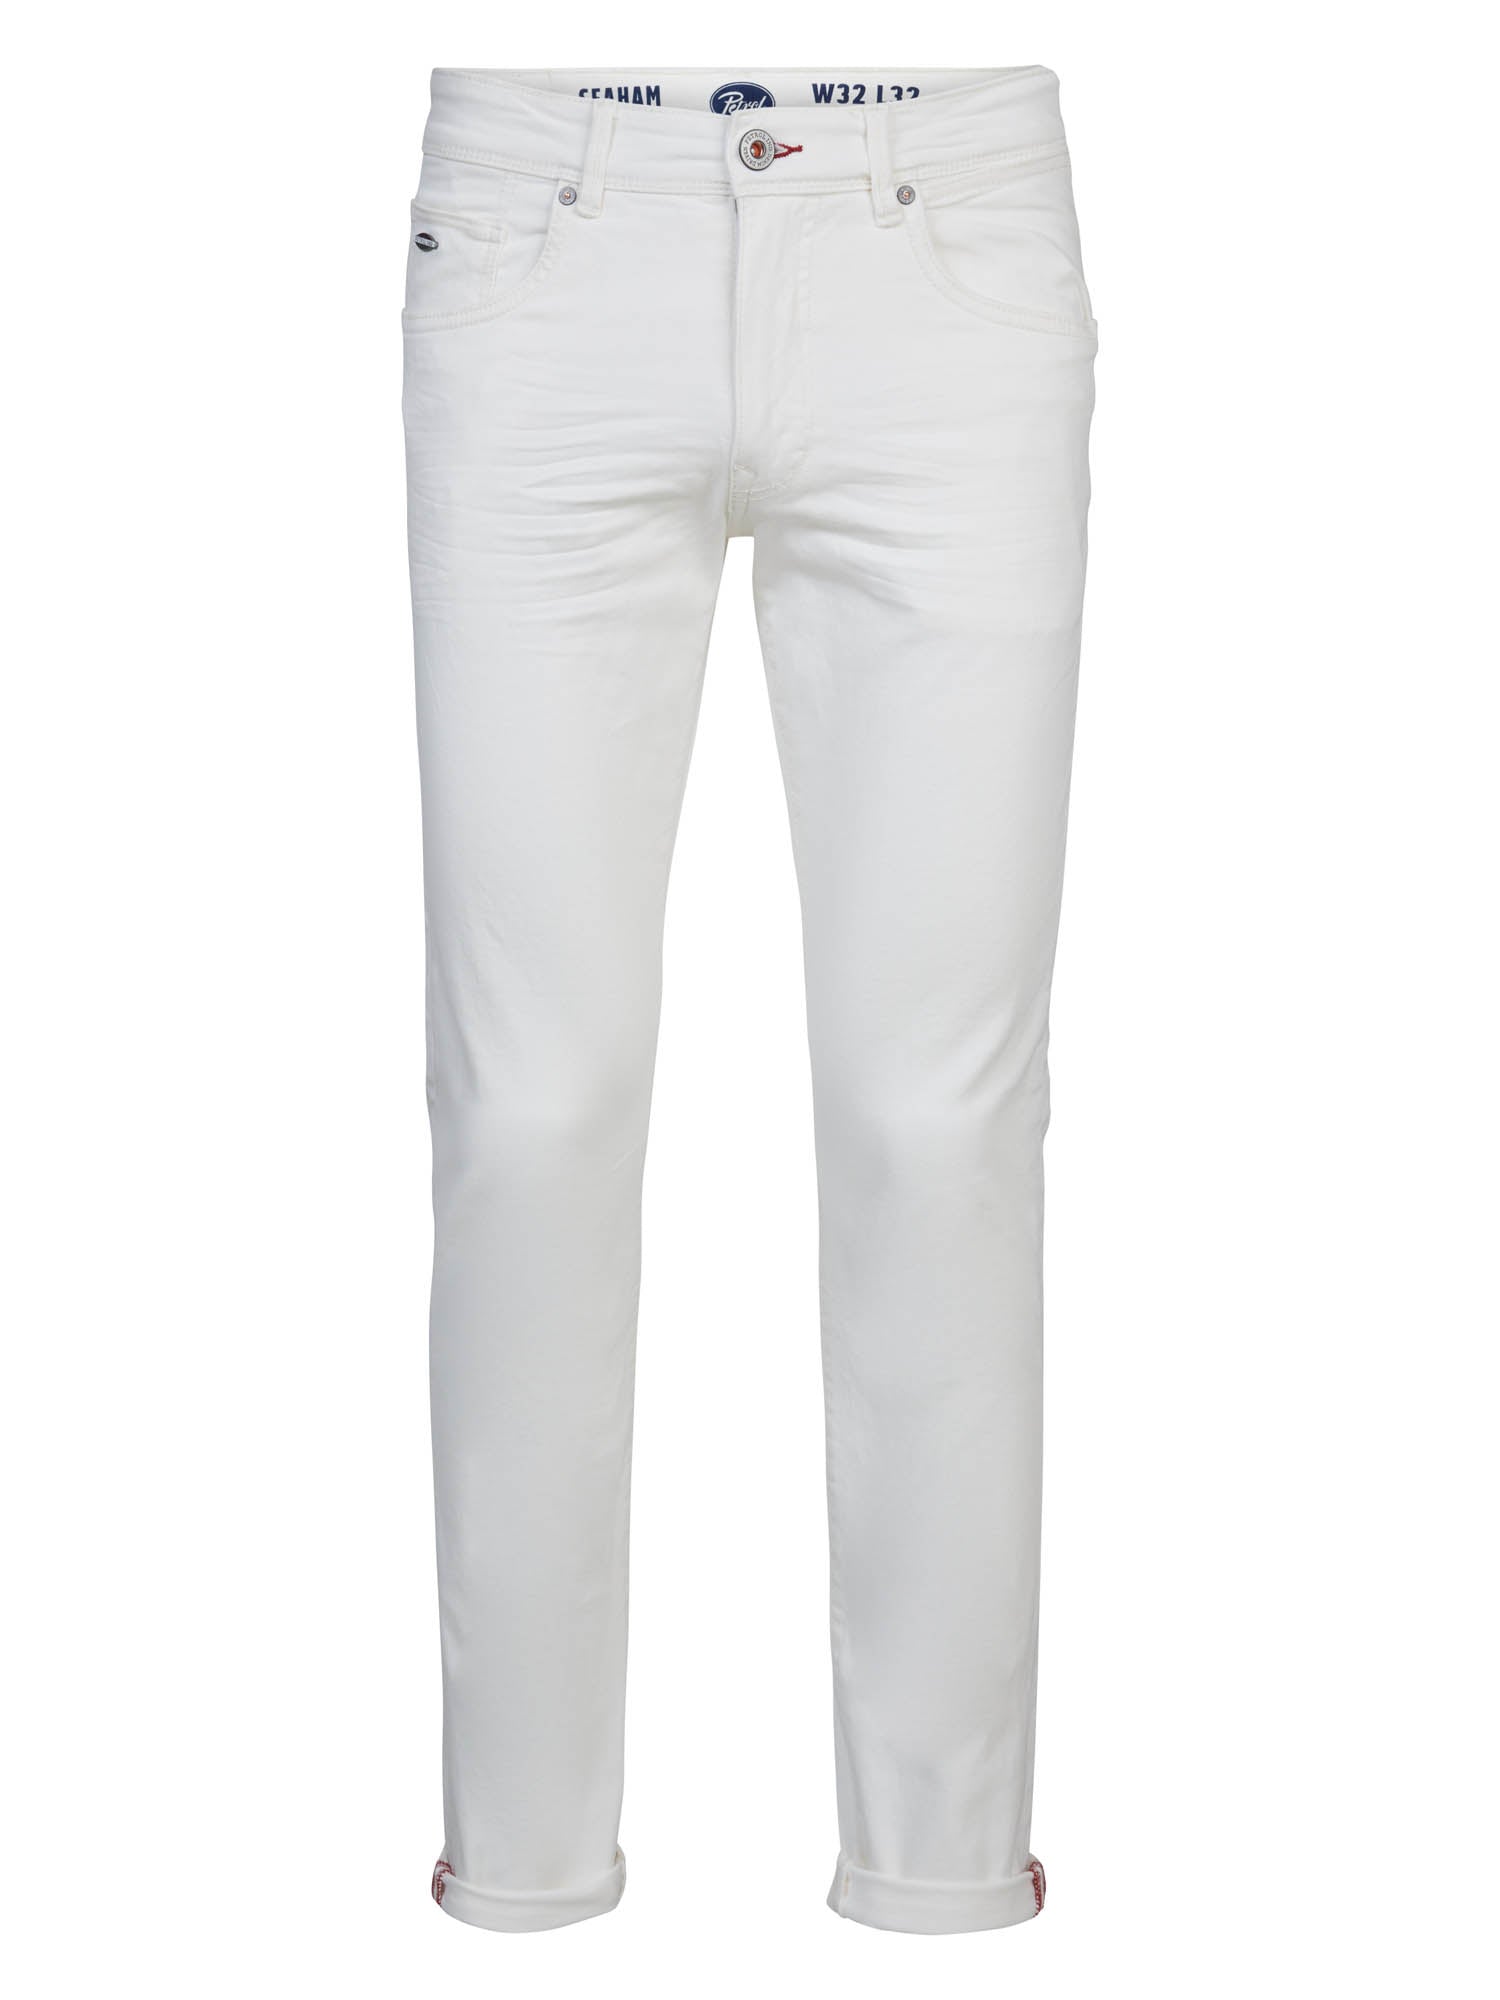 Petrol Industries Seaham Coloured, Slim-fit Jeans Bright White - 31